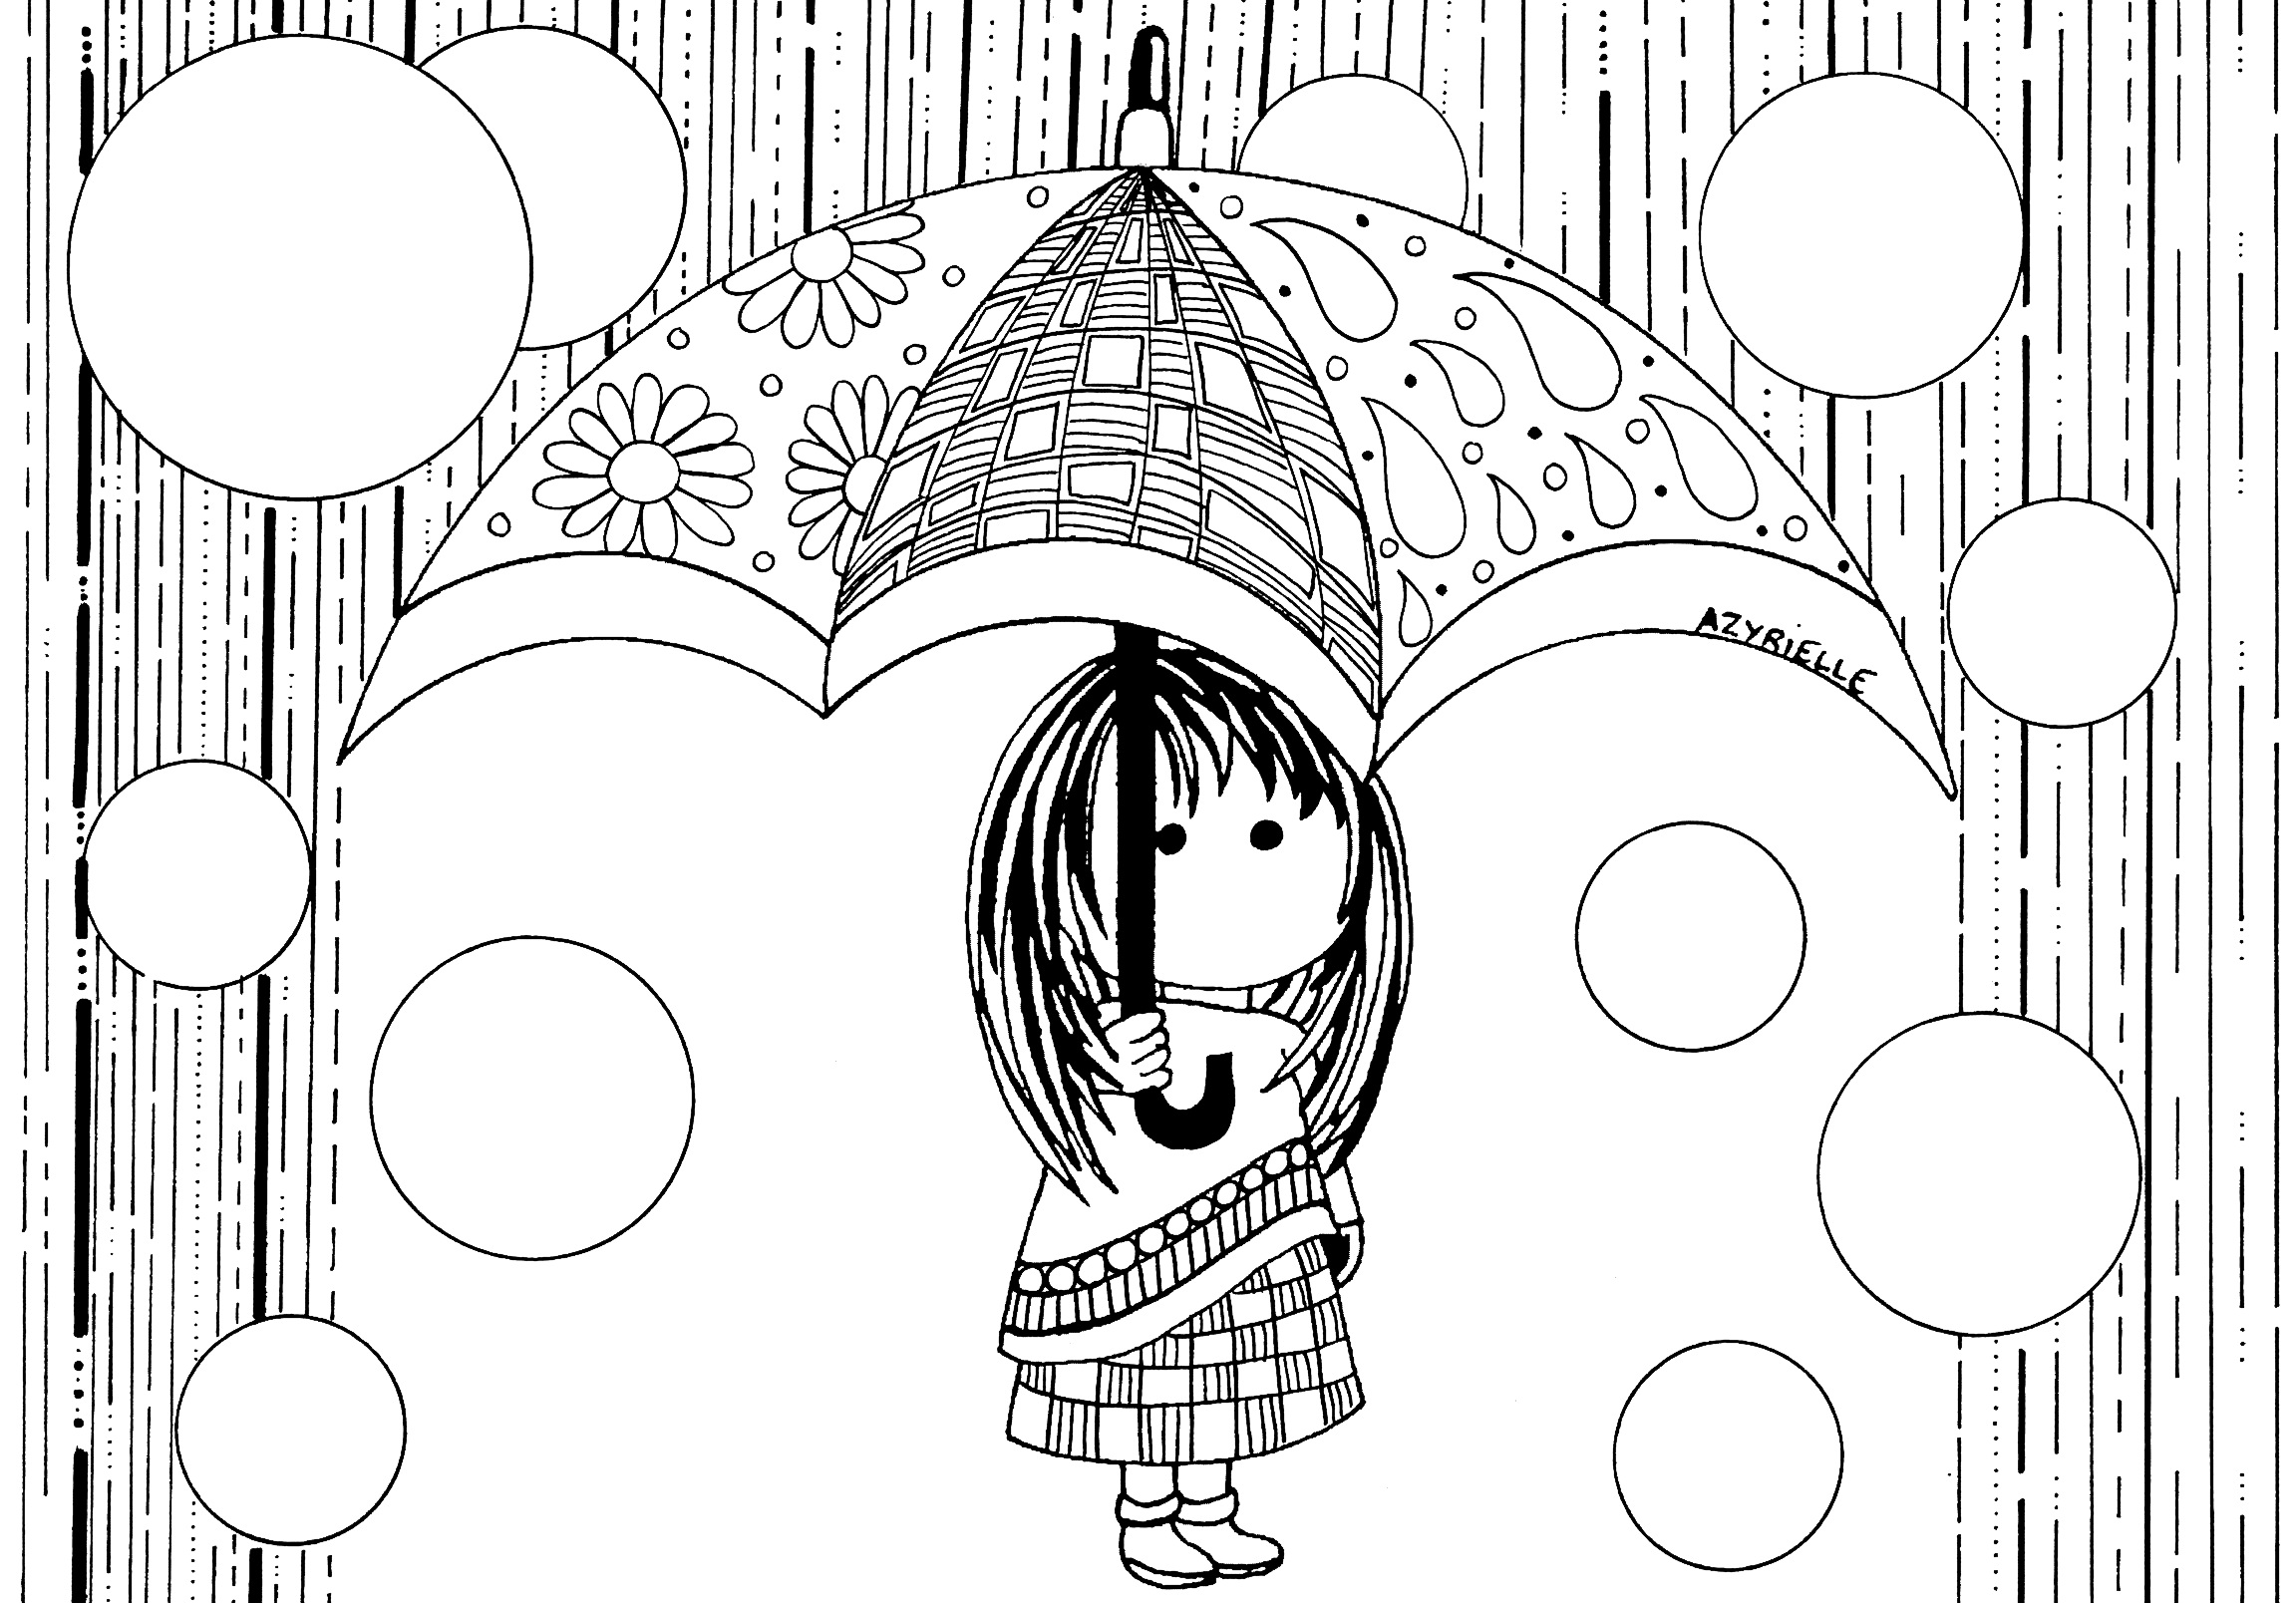 'Rain', a simple and soothing coloring page, Artist : Azyrielle